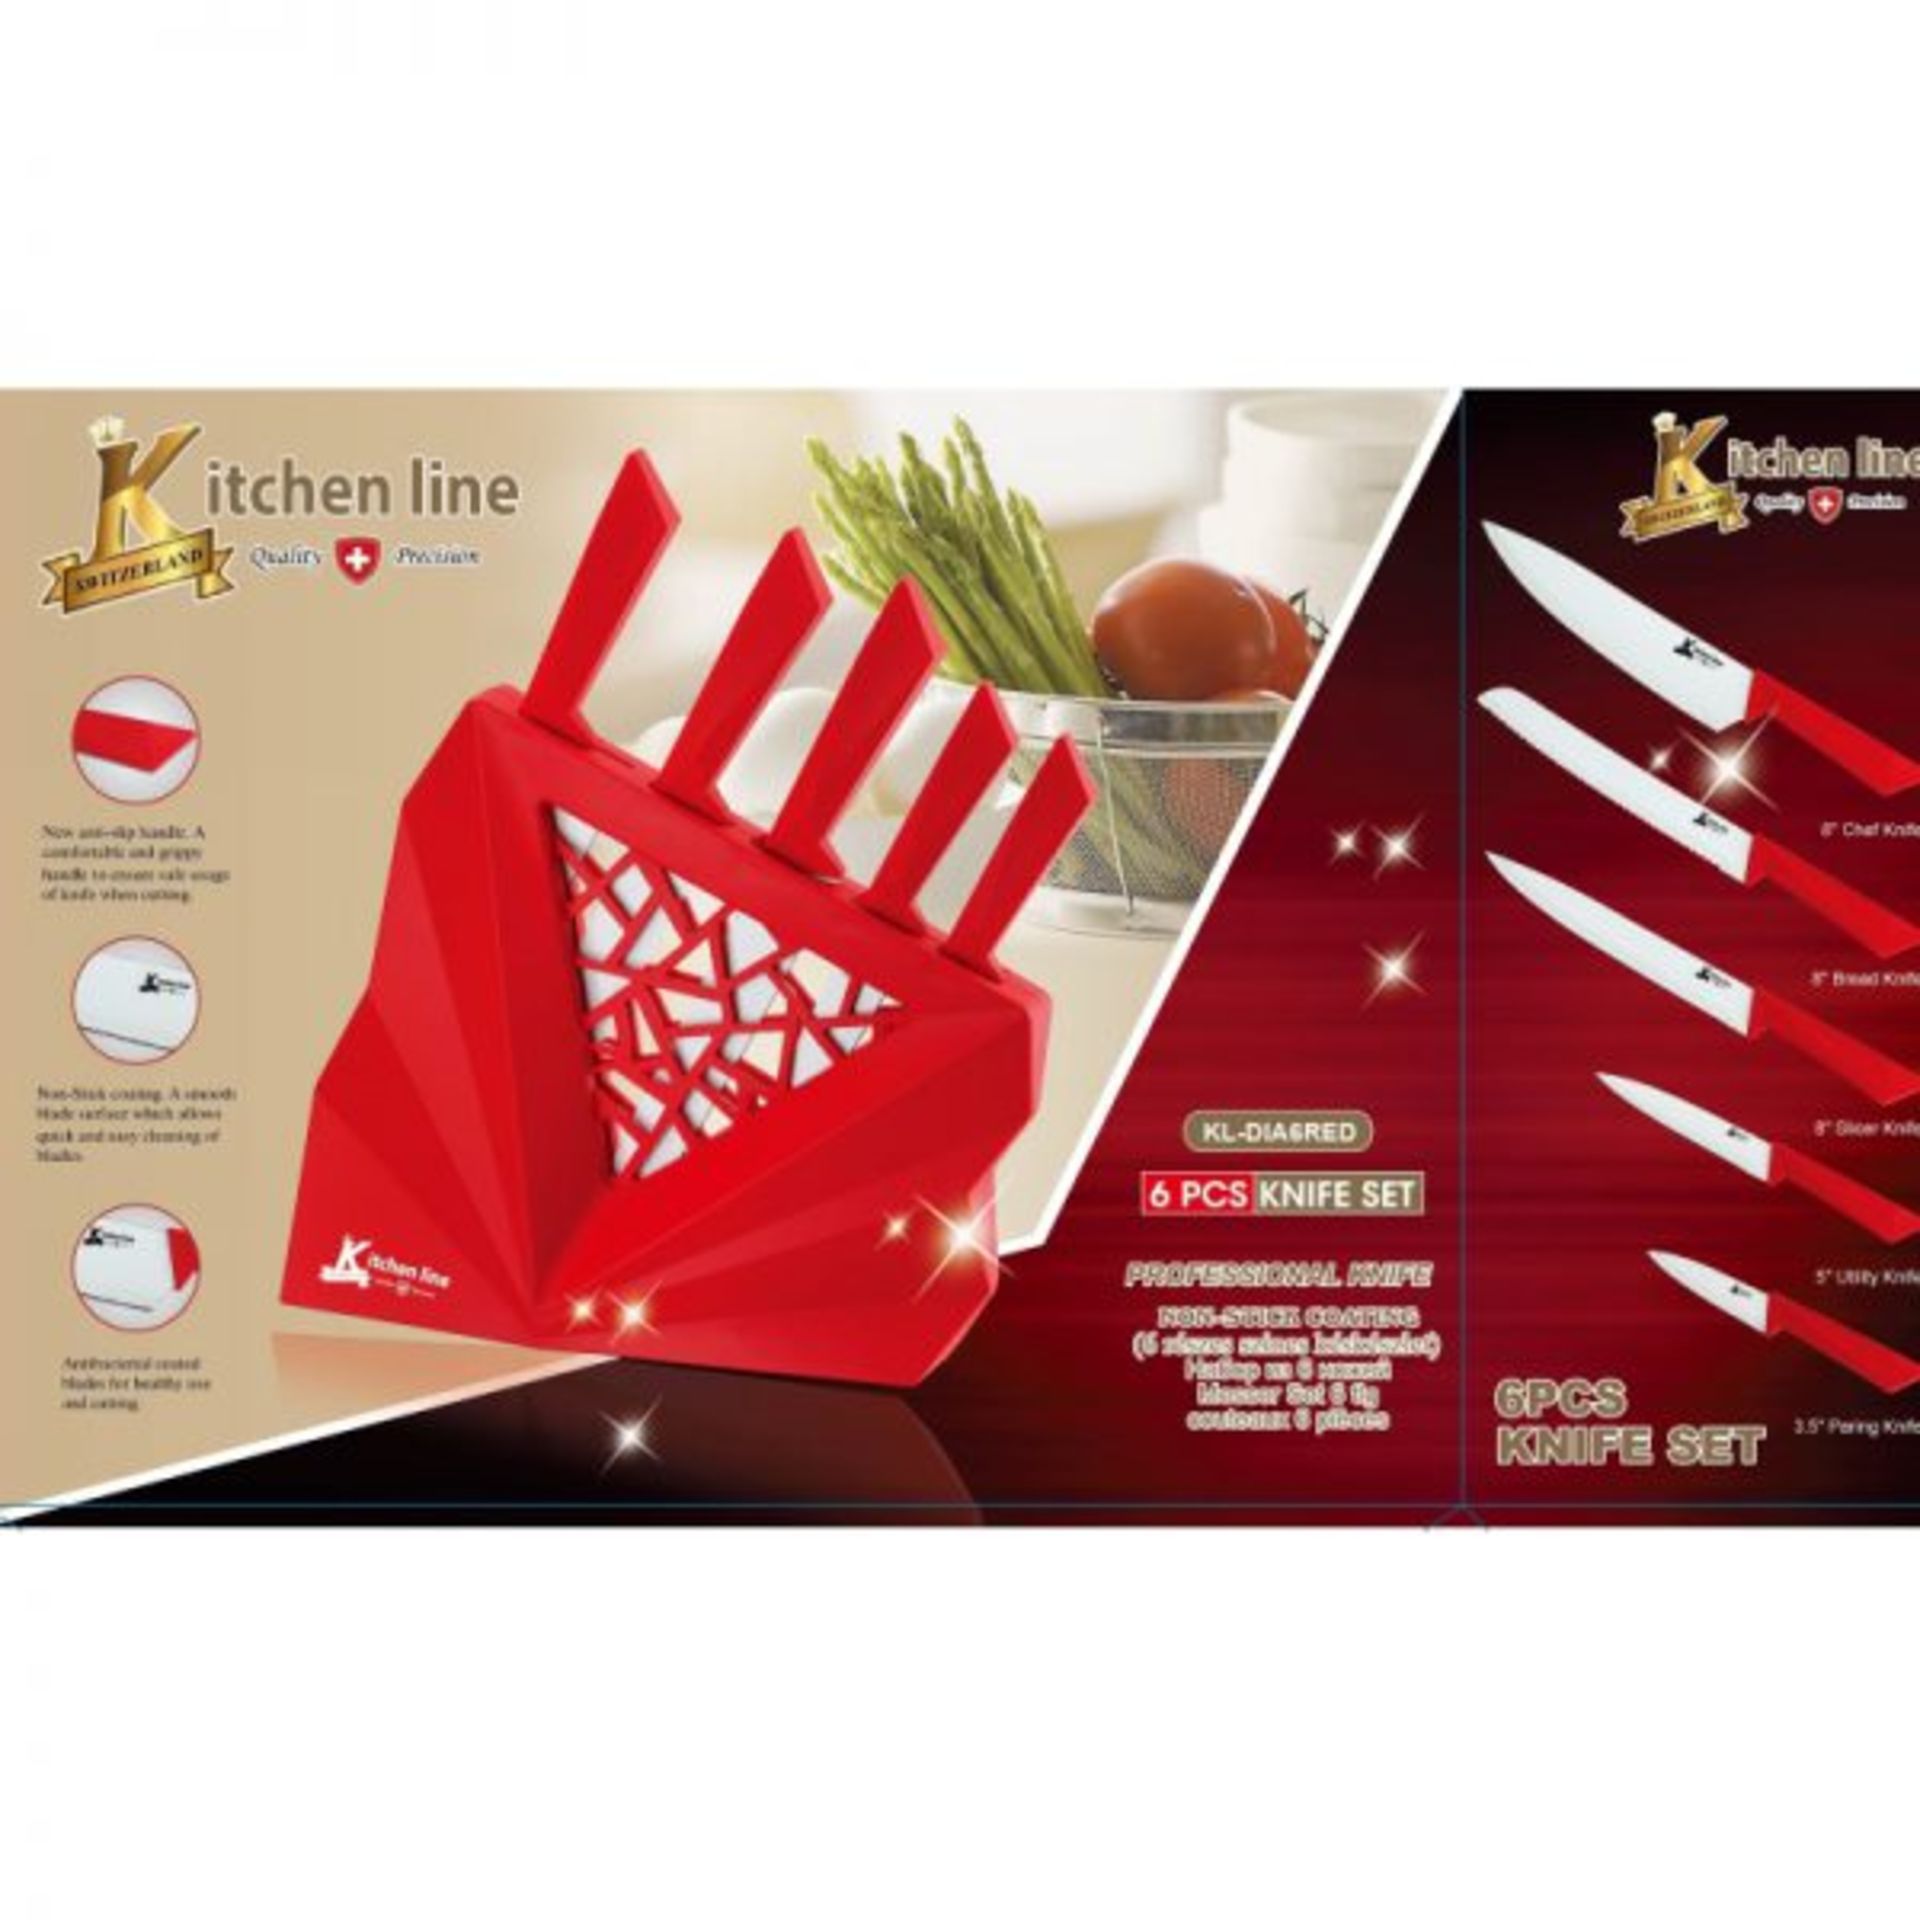 V Brand New Kitchen Line Switzerland 6 Piece Knife Set With Includes 8" Chef Knife/8" Bread Knife/